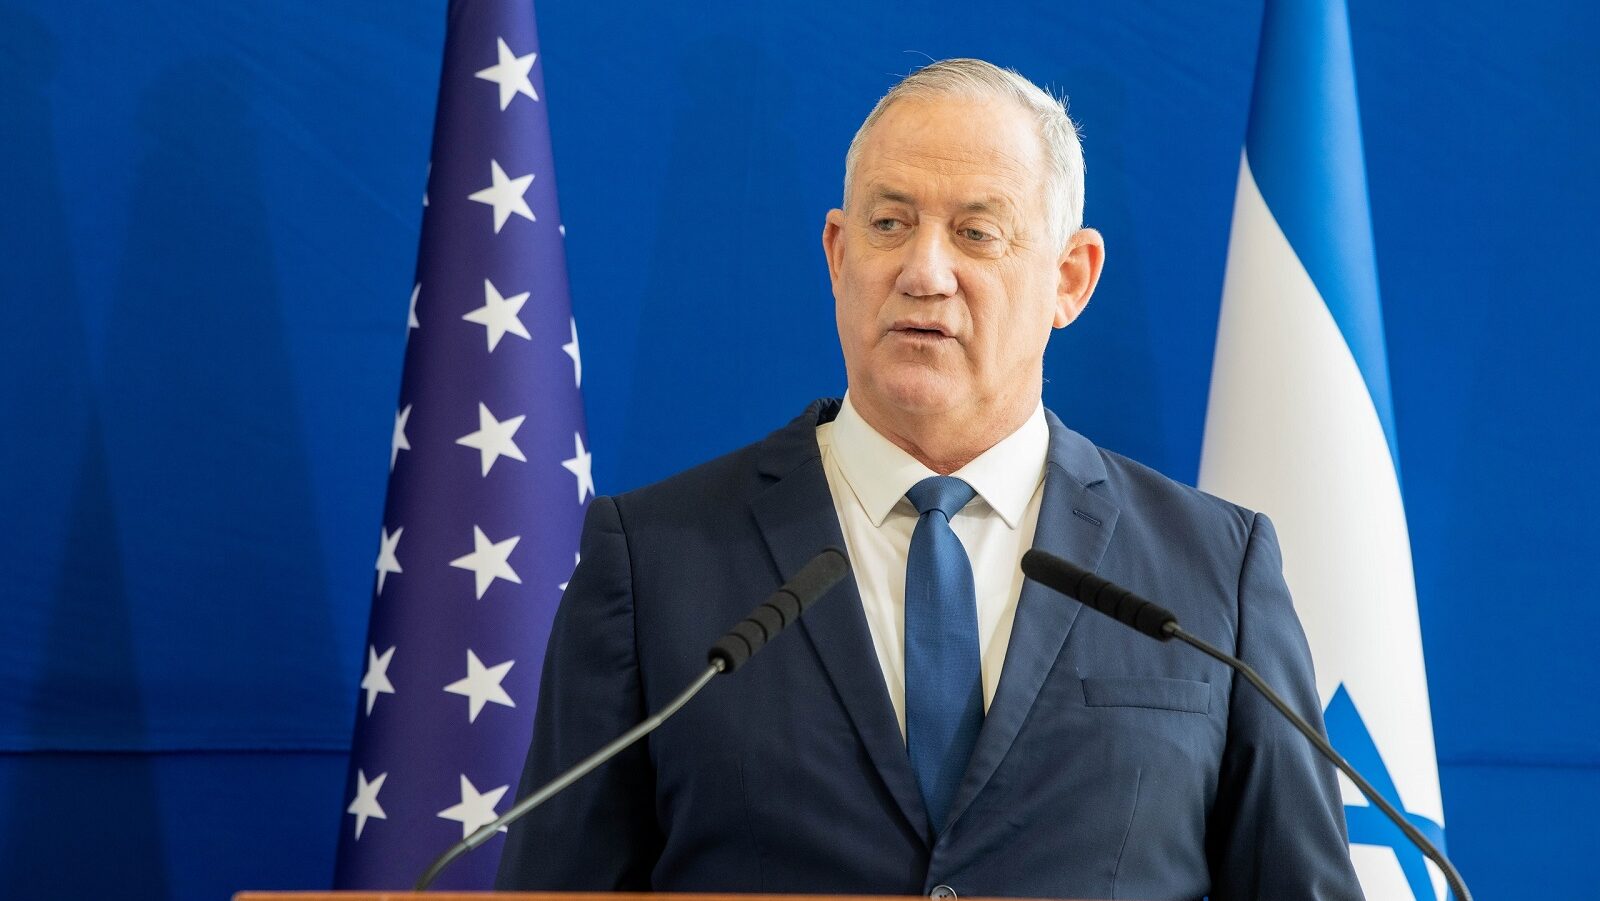 Minister Gantz Urges Elections in September To Renew Public Trust in Israel’s Government